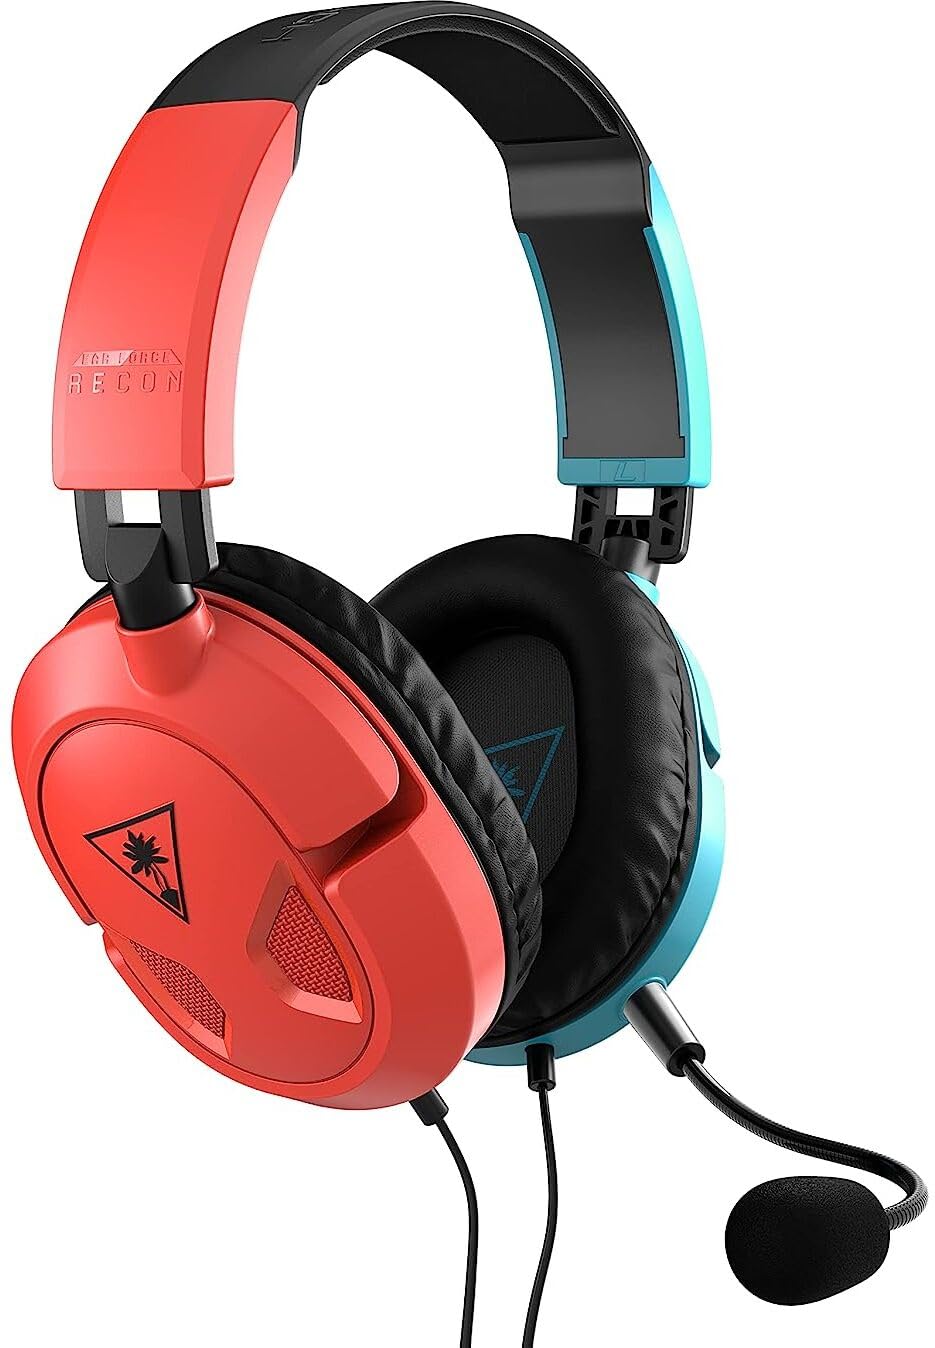  [AUSTRALIA] - Turtle Beach Recon 50 Gaming Headset for Nintendo Switch, Xbox Series X|S, Xbox One, PS5, PS4, PlayStation, Mobile, & PC with 3.5mm – Removable Mic, 40mm Speakers – Red/Blue